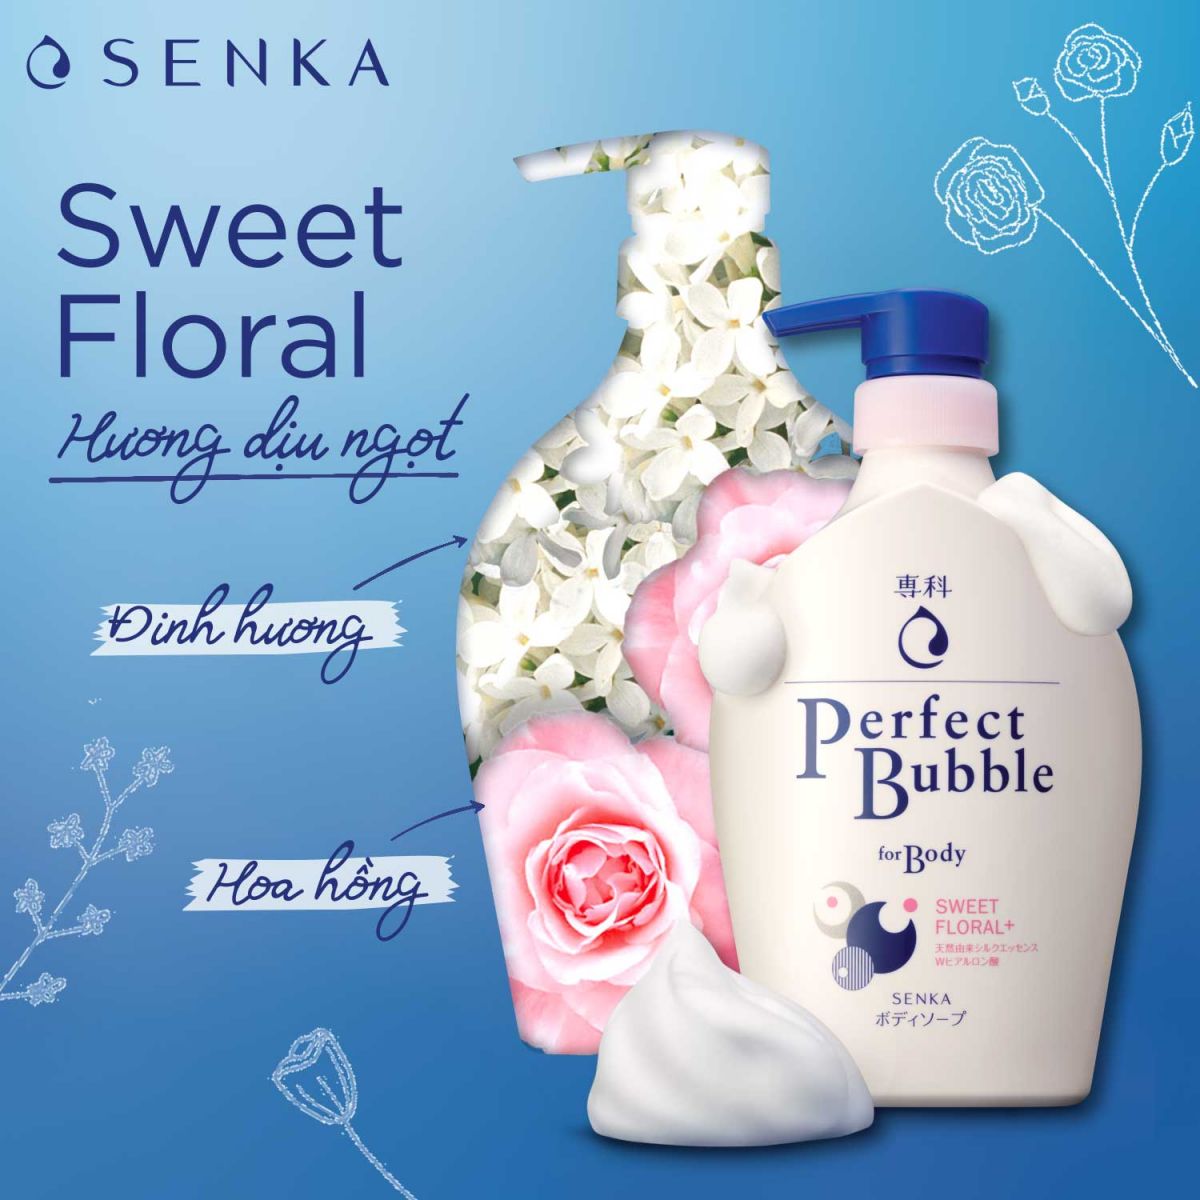 Sữa tắm Senka trắng Perfect Bubble For Body Sweet Floral+